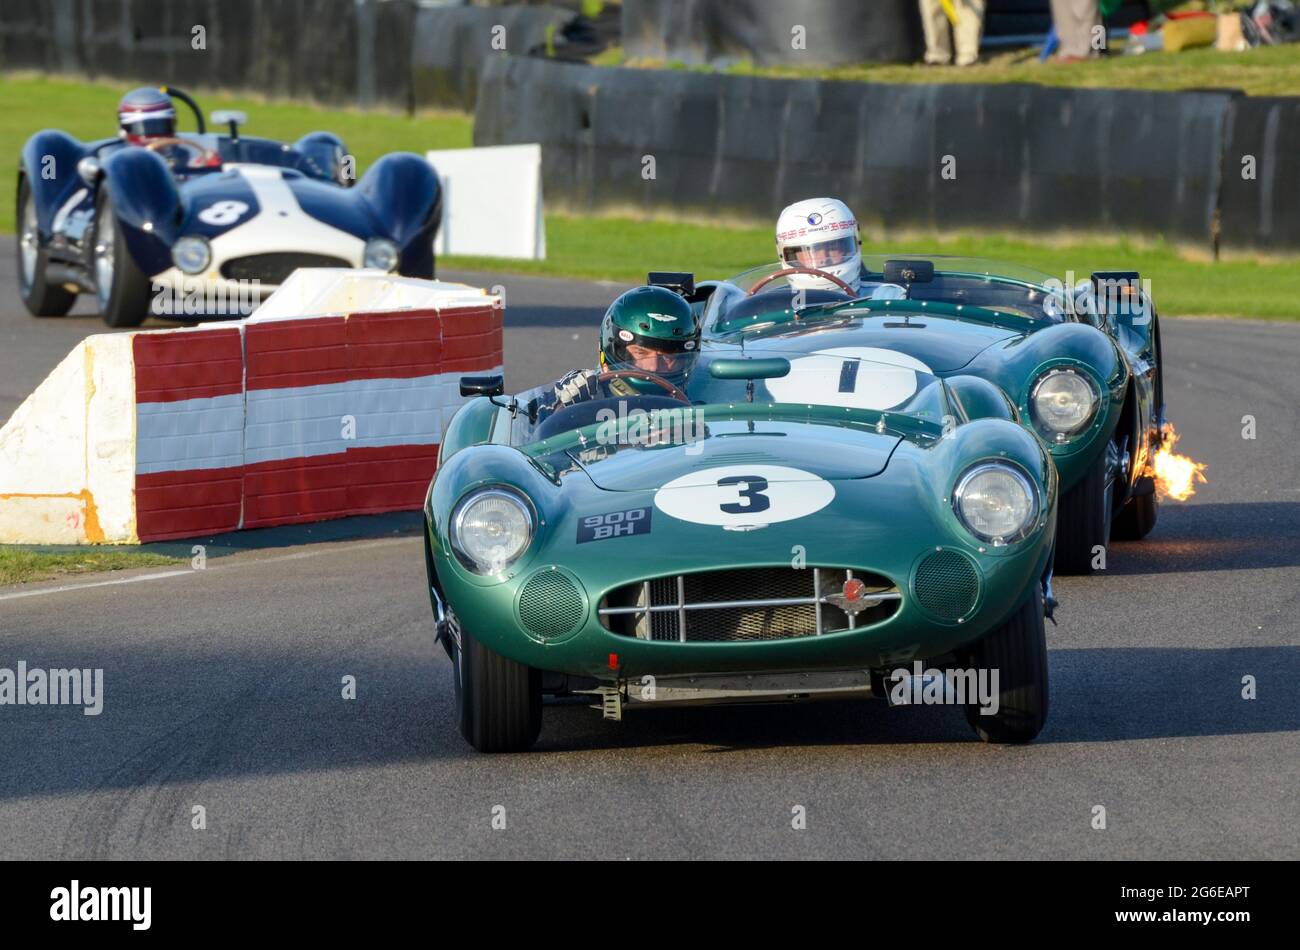 Aston Martin DBR1 classic sports car, vintage racing car competing in the Sussex Trophy at the Goodwood Revival event UK. Wolfgang Friedrichs DBR1/5 Stock Photo